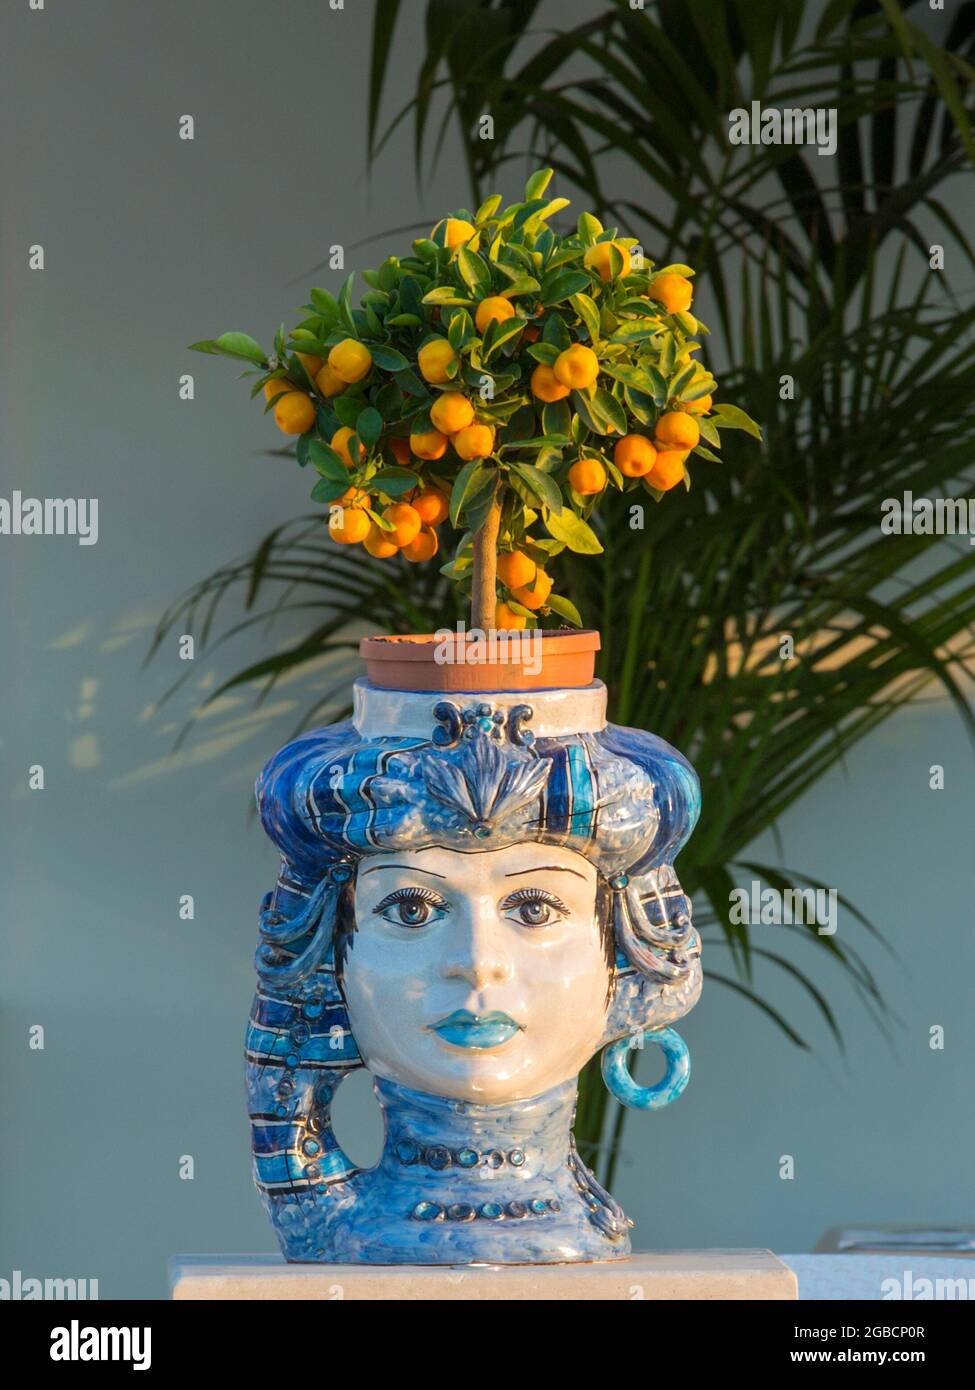 Taormina, Messina, Sicily, Italy. Sunlit miniature orange tree growing in magnificent ceramic Testa di Moro flowerpot in the form of a human head. Stock Photo